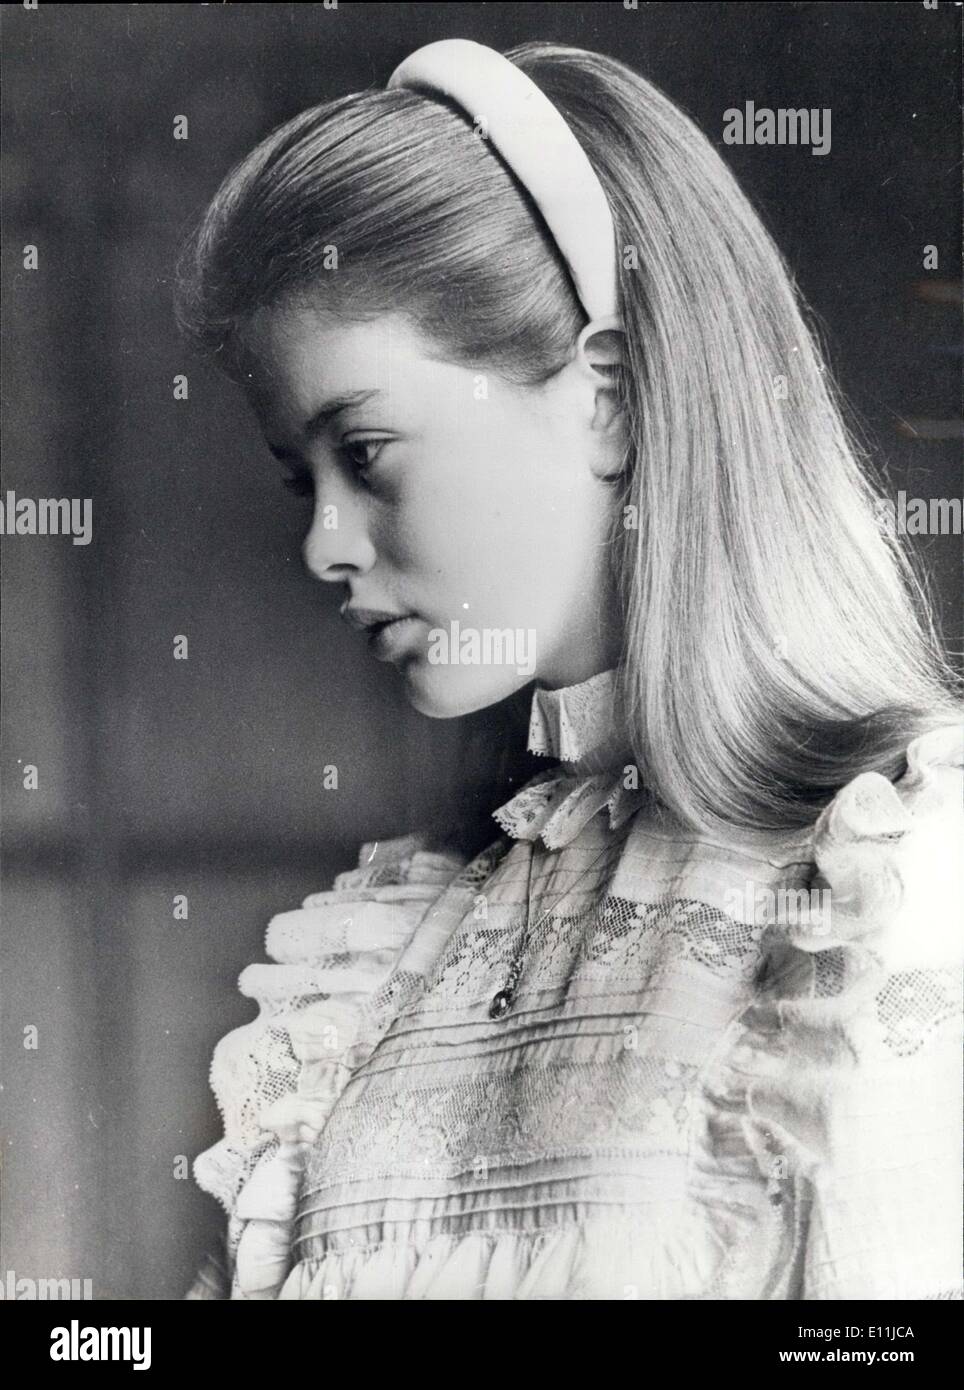 Apr. 28, 1978 - Birthday Picture of Lady Helen Windsor: Lady Helen Windsor, Photographed at Windsor castle by her father, the Duke of Kent, on the morning of her confirmation on April 1978. Lady Helen, who was confirmed with HRH Prince Edward, the Queens youngest Son, and Lady Sarah Armstrong-Jones, daughter of HRH Princess Margaret and Lord Snowdon, wears a Long dress of white lawn trimmed with lace. Lady Helen, who celebrates her birthday today, 28th April 1978, is a pupil at St. Mary's School, Wantage. Stock Photo